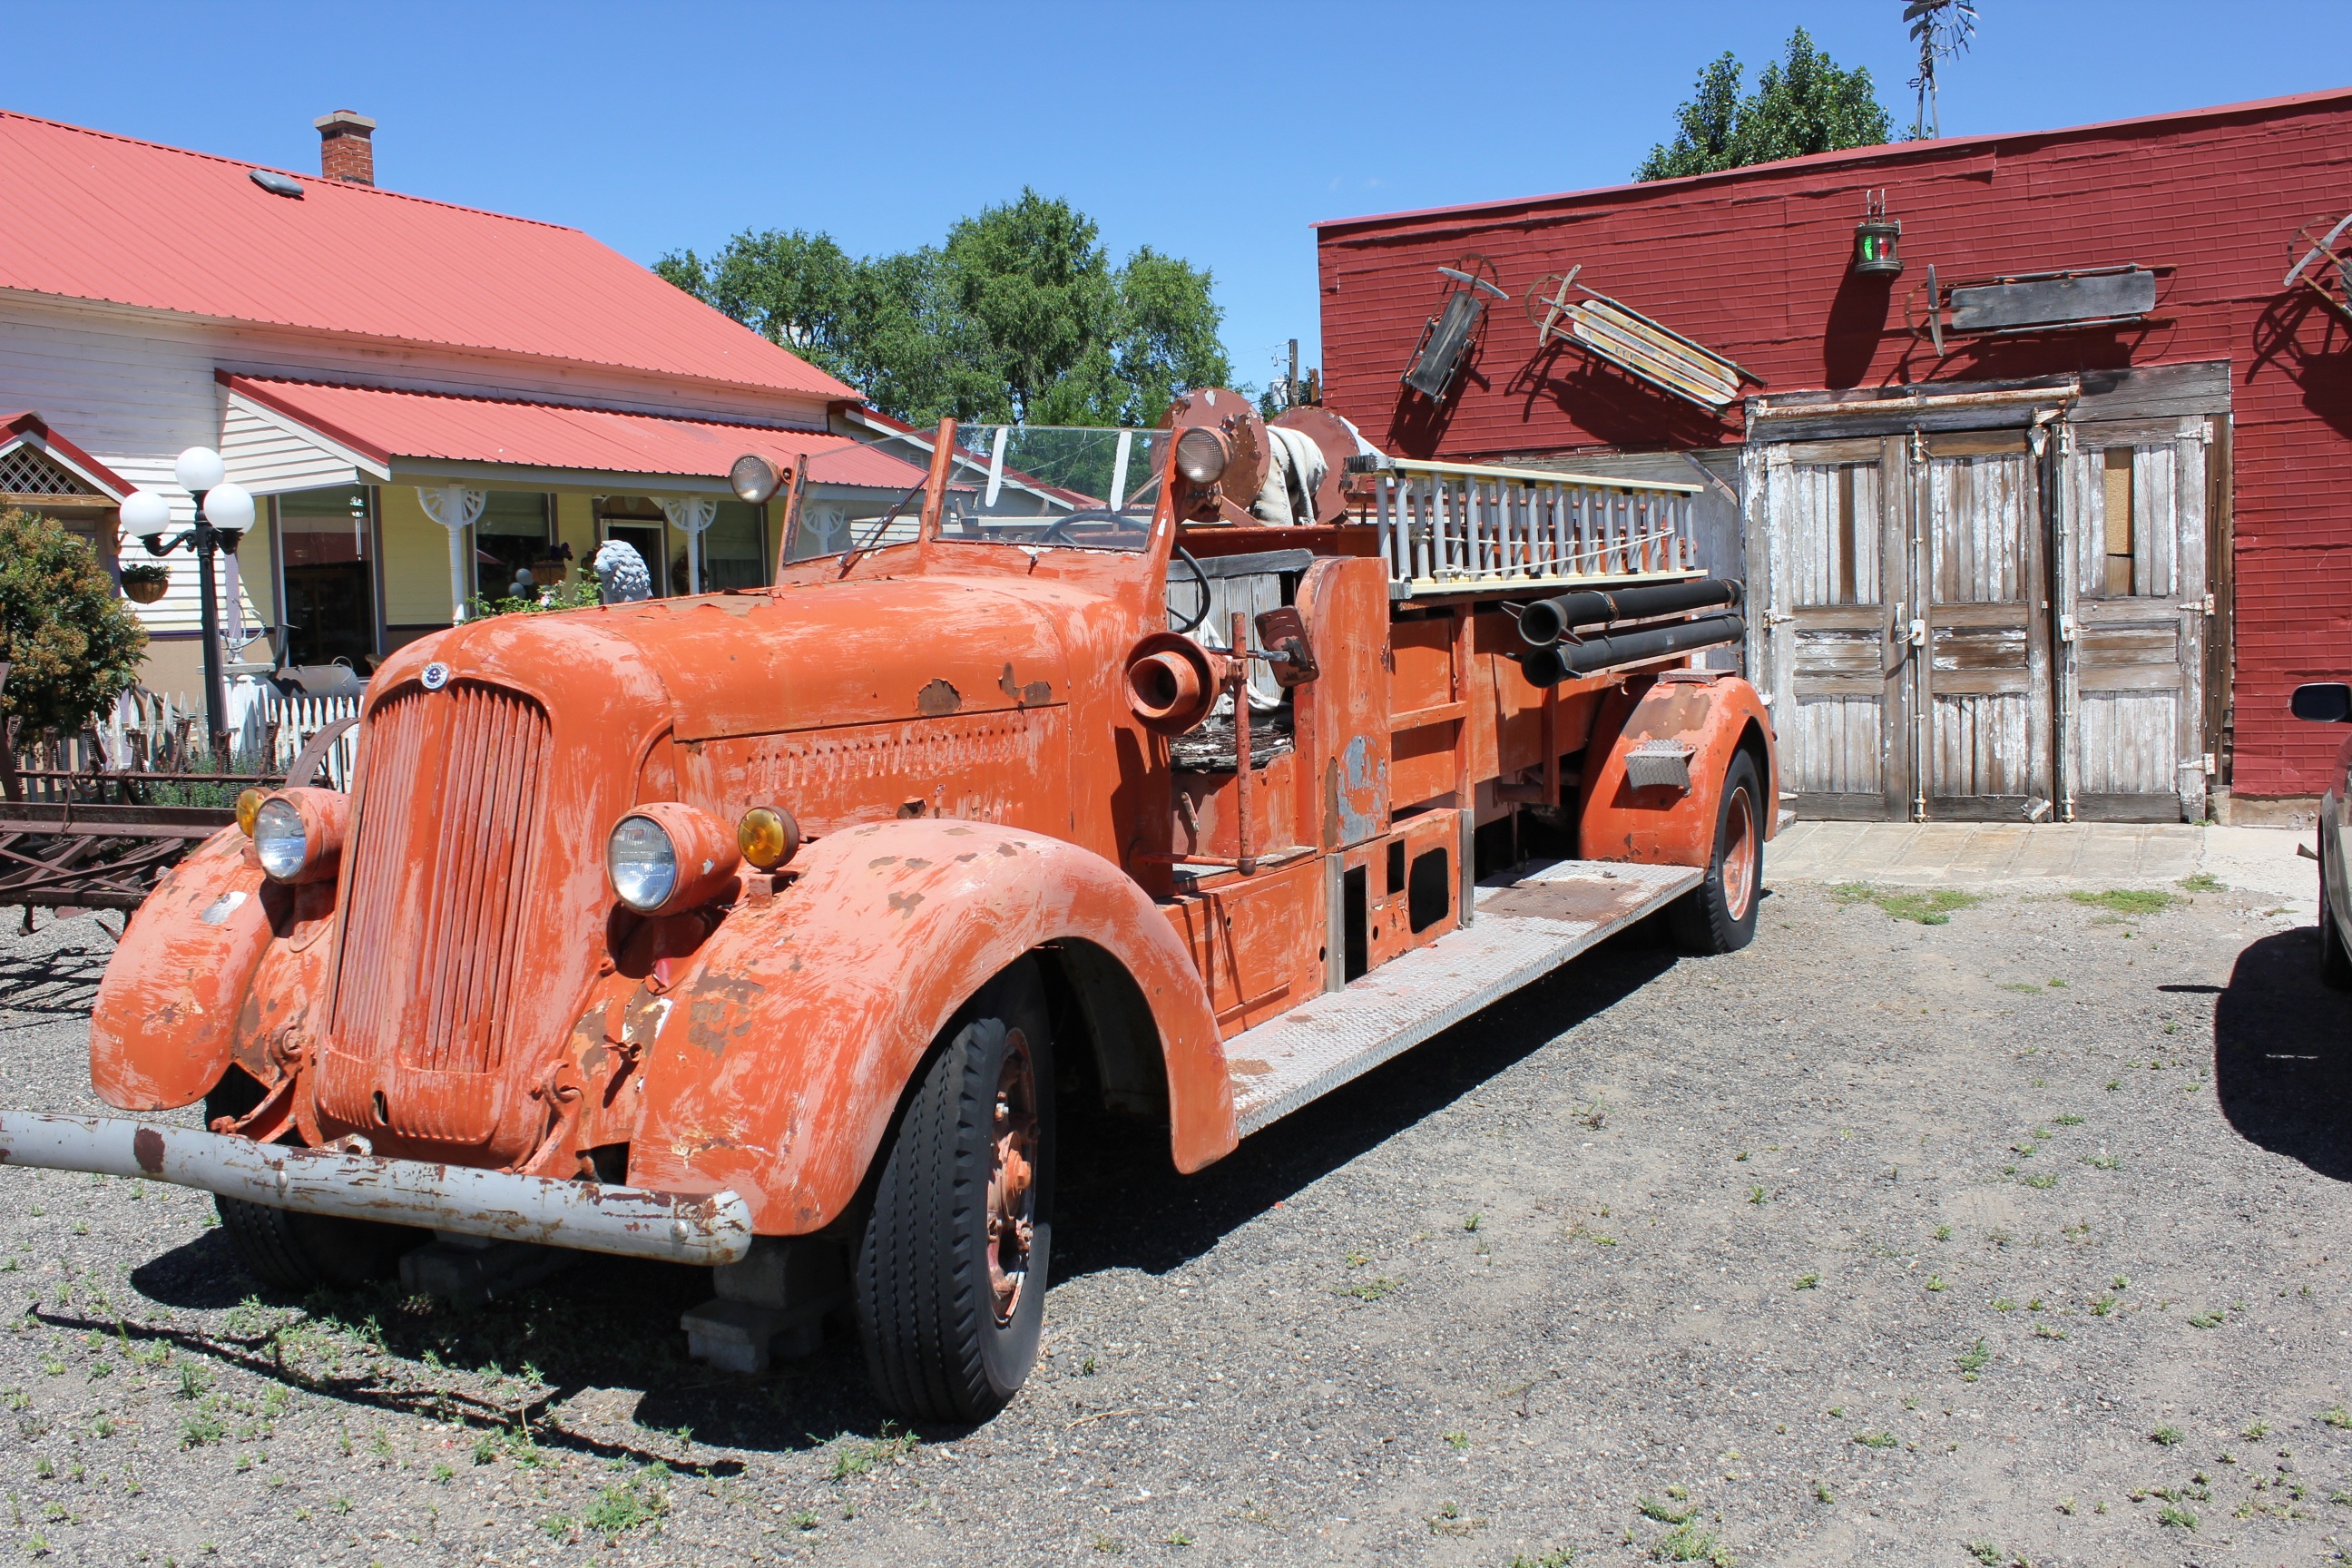 Antique Fire Engine Fire Truck Old Truck Vehicle Vintage Wreck 2592x1728